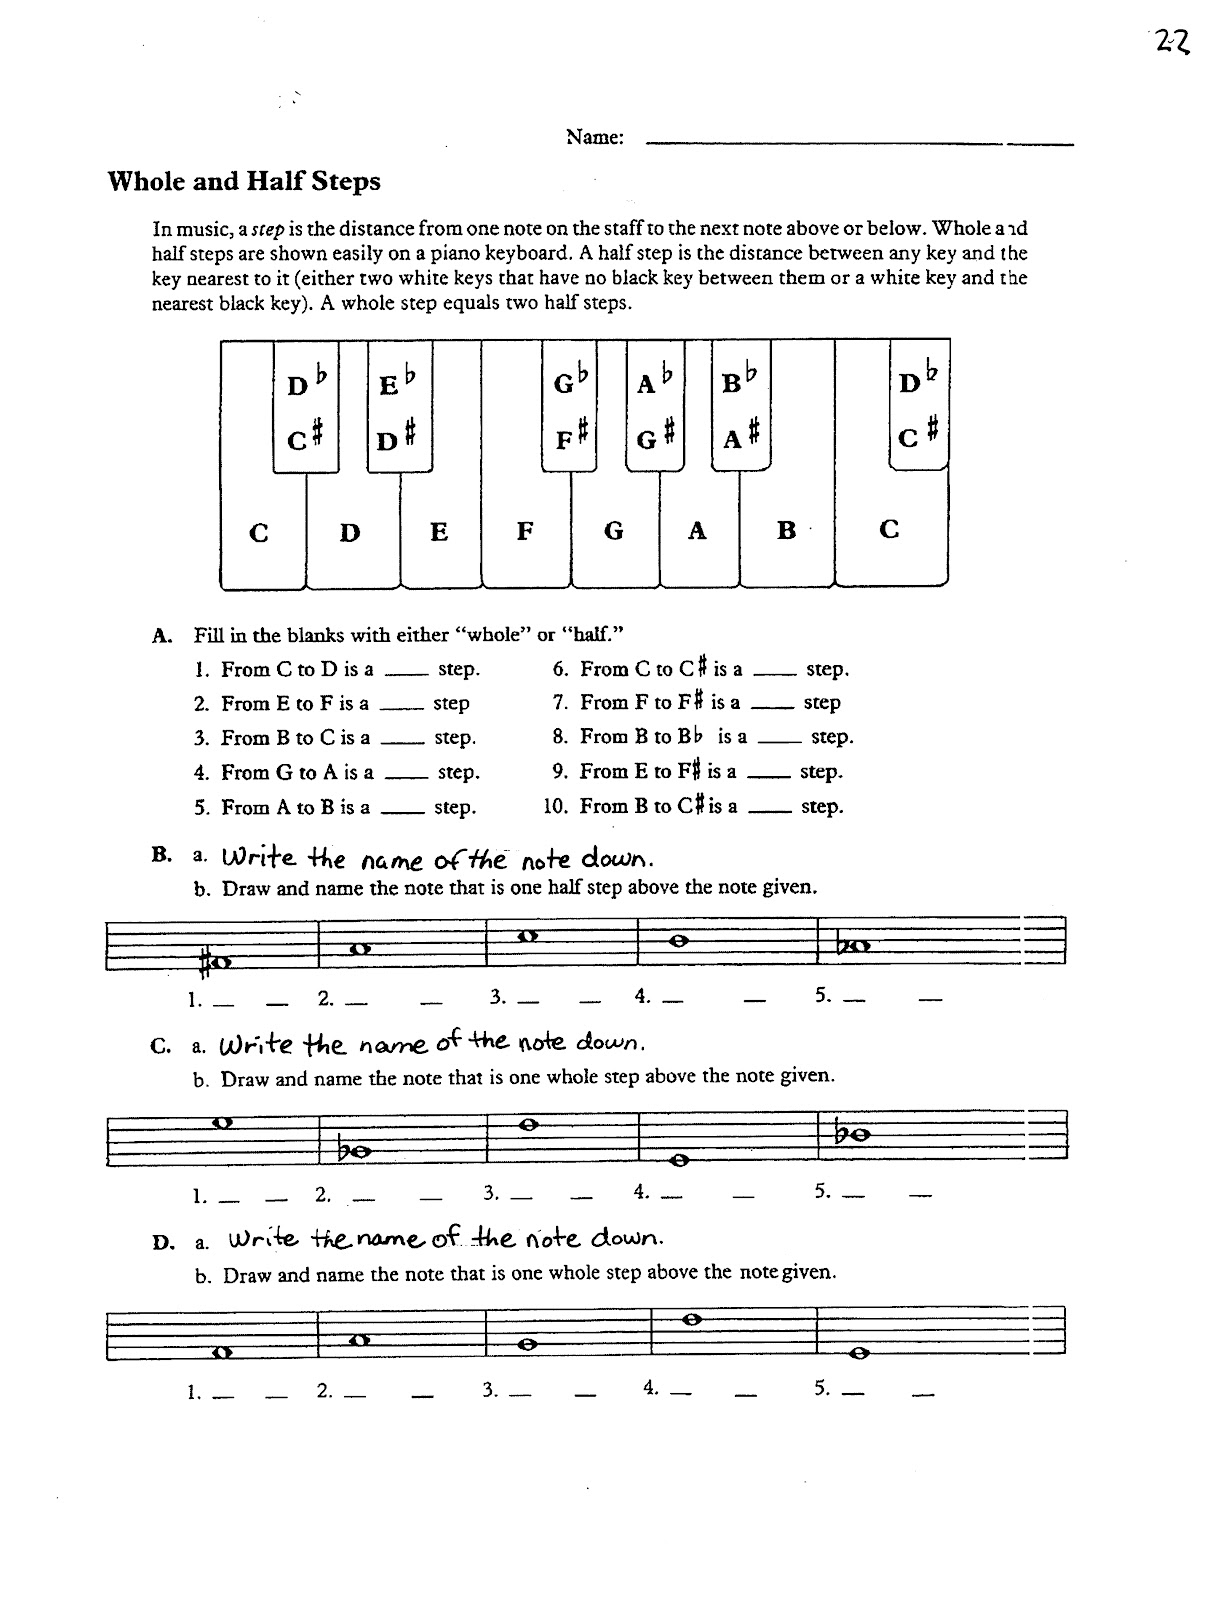 miss-jacobson-s-music-theory-10-half-steps-whole-steps